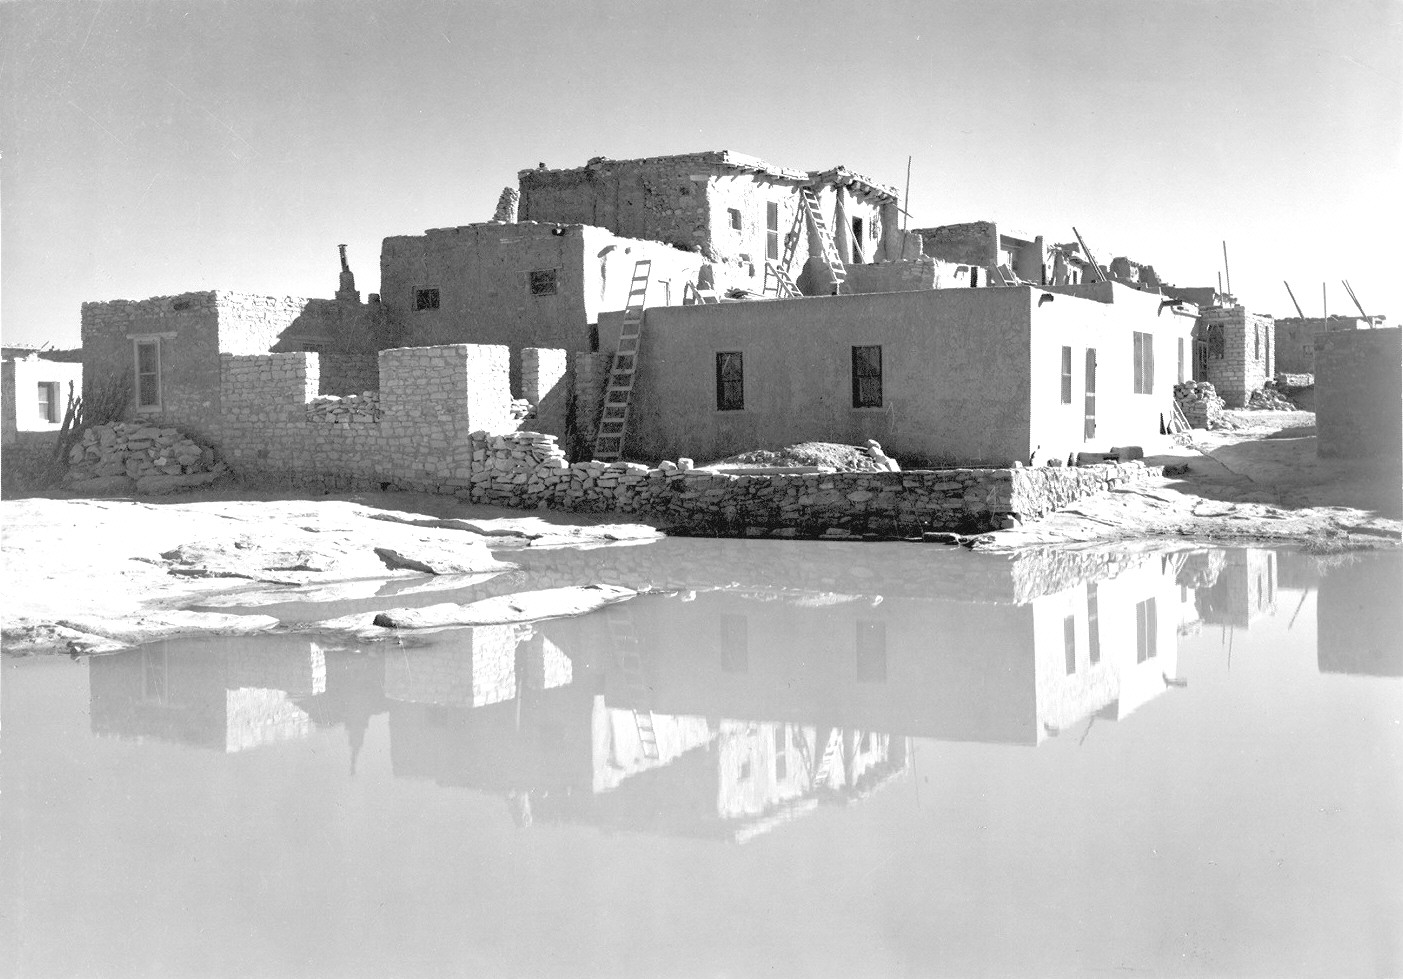 Full Side View of Adobe House with Water in Foreground, Acoma Pueblo [National Historic Landmark, New Mexico]. Credit: National Archives/Ansel Adams/public domain